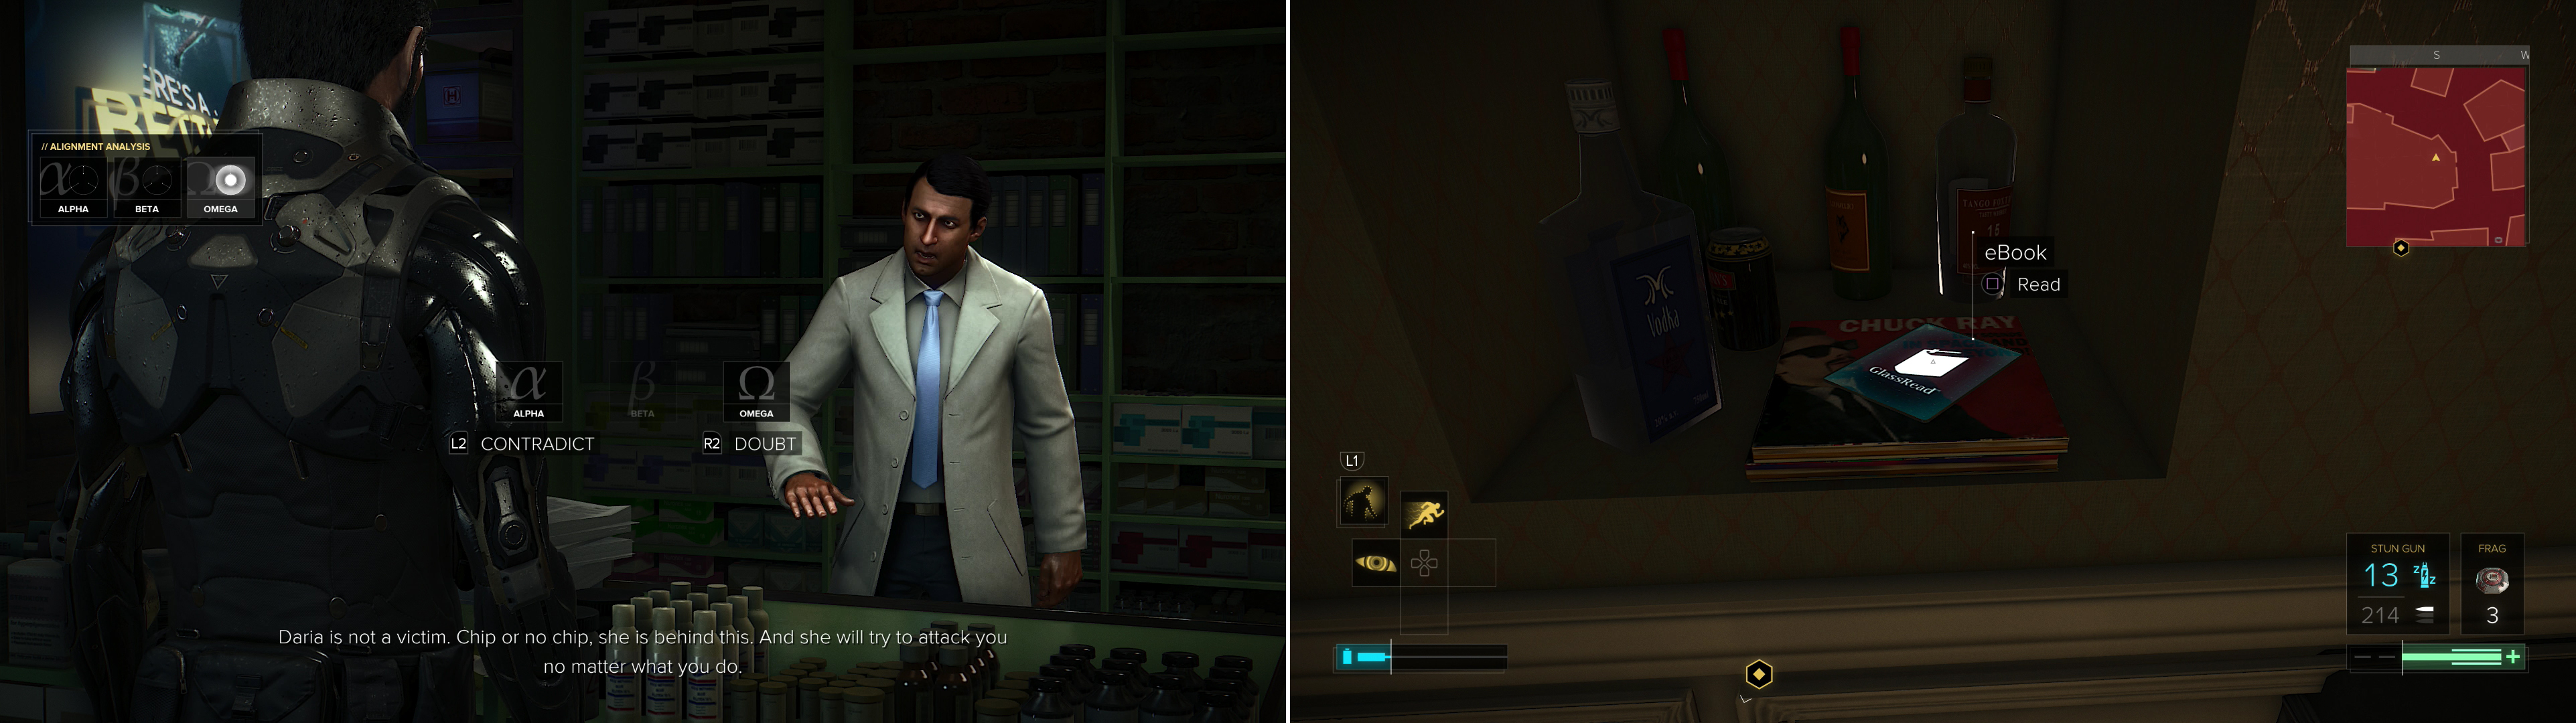 Use the CASIE to get Cipra to reveal his secrets (left) then head upstairs and loot the safe behind the refrigerator to find an eBook (right).